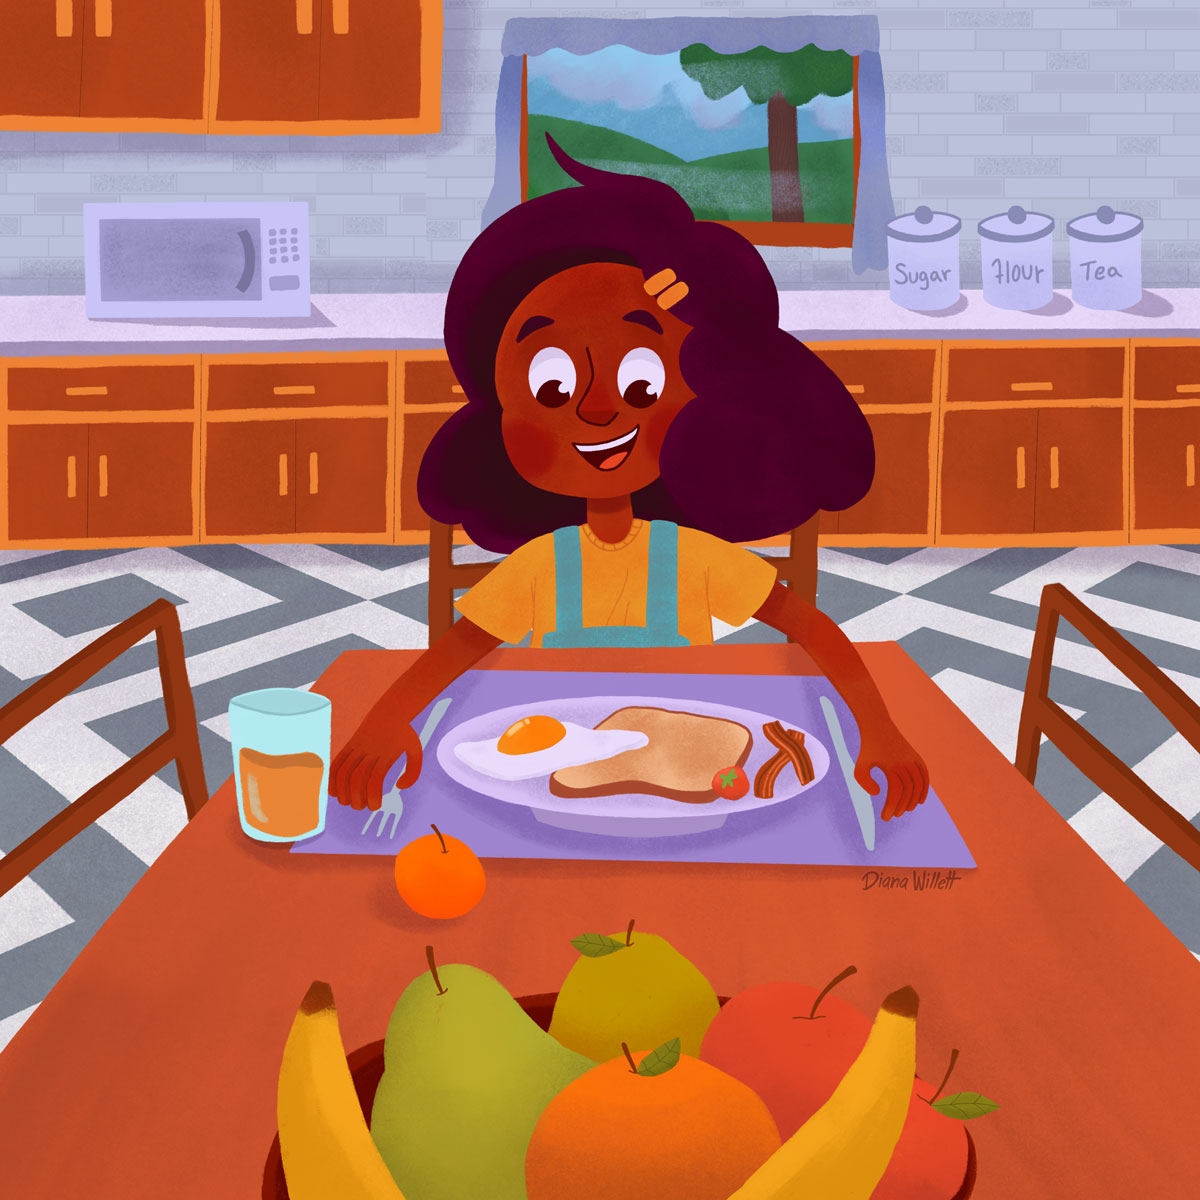 Kidlit Illustration by Diana Willett of child eating breakfast in a kitchen.